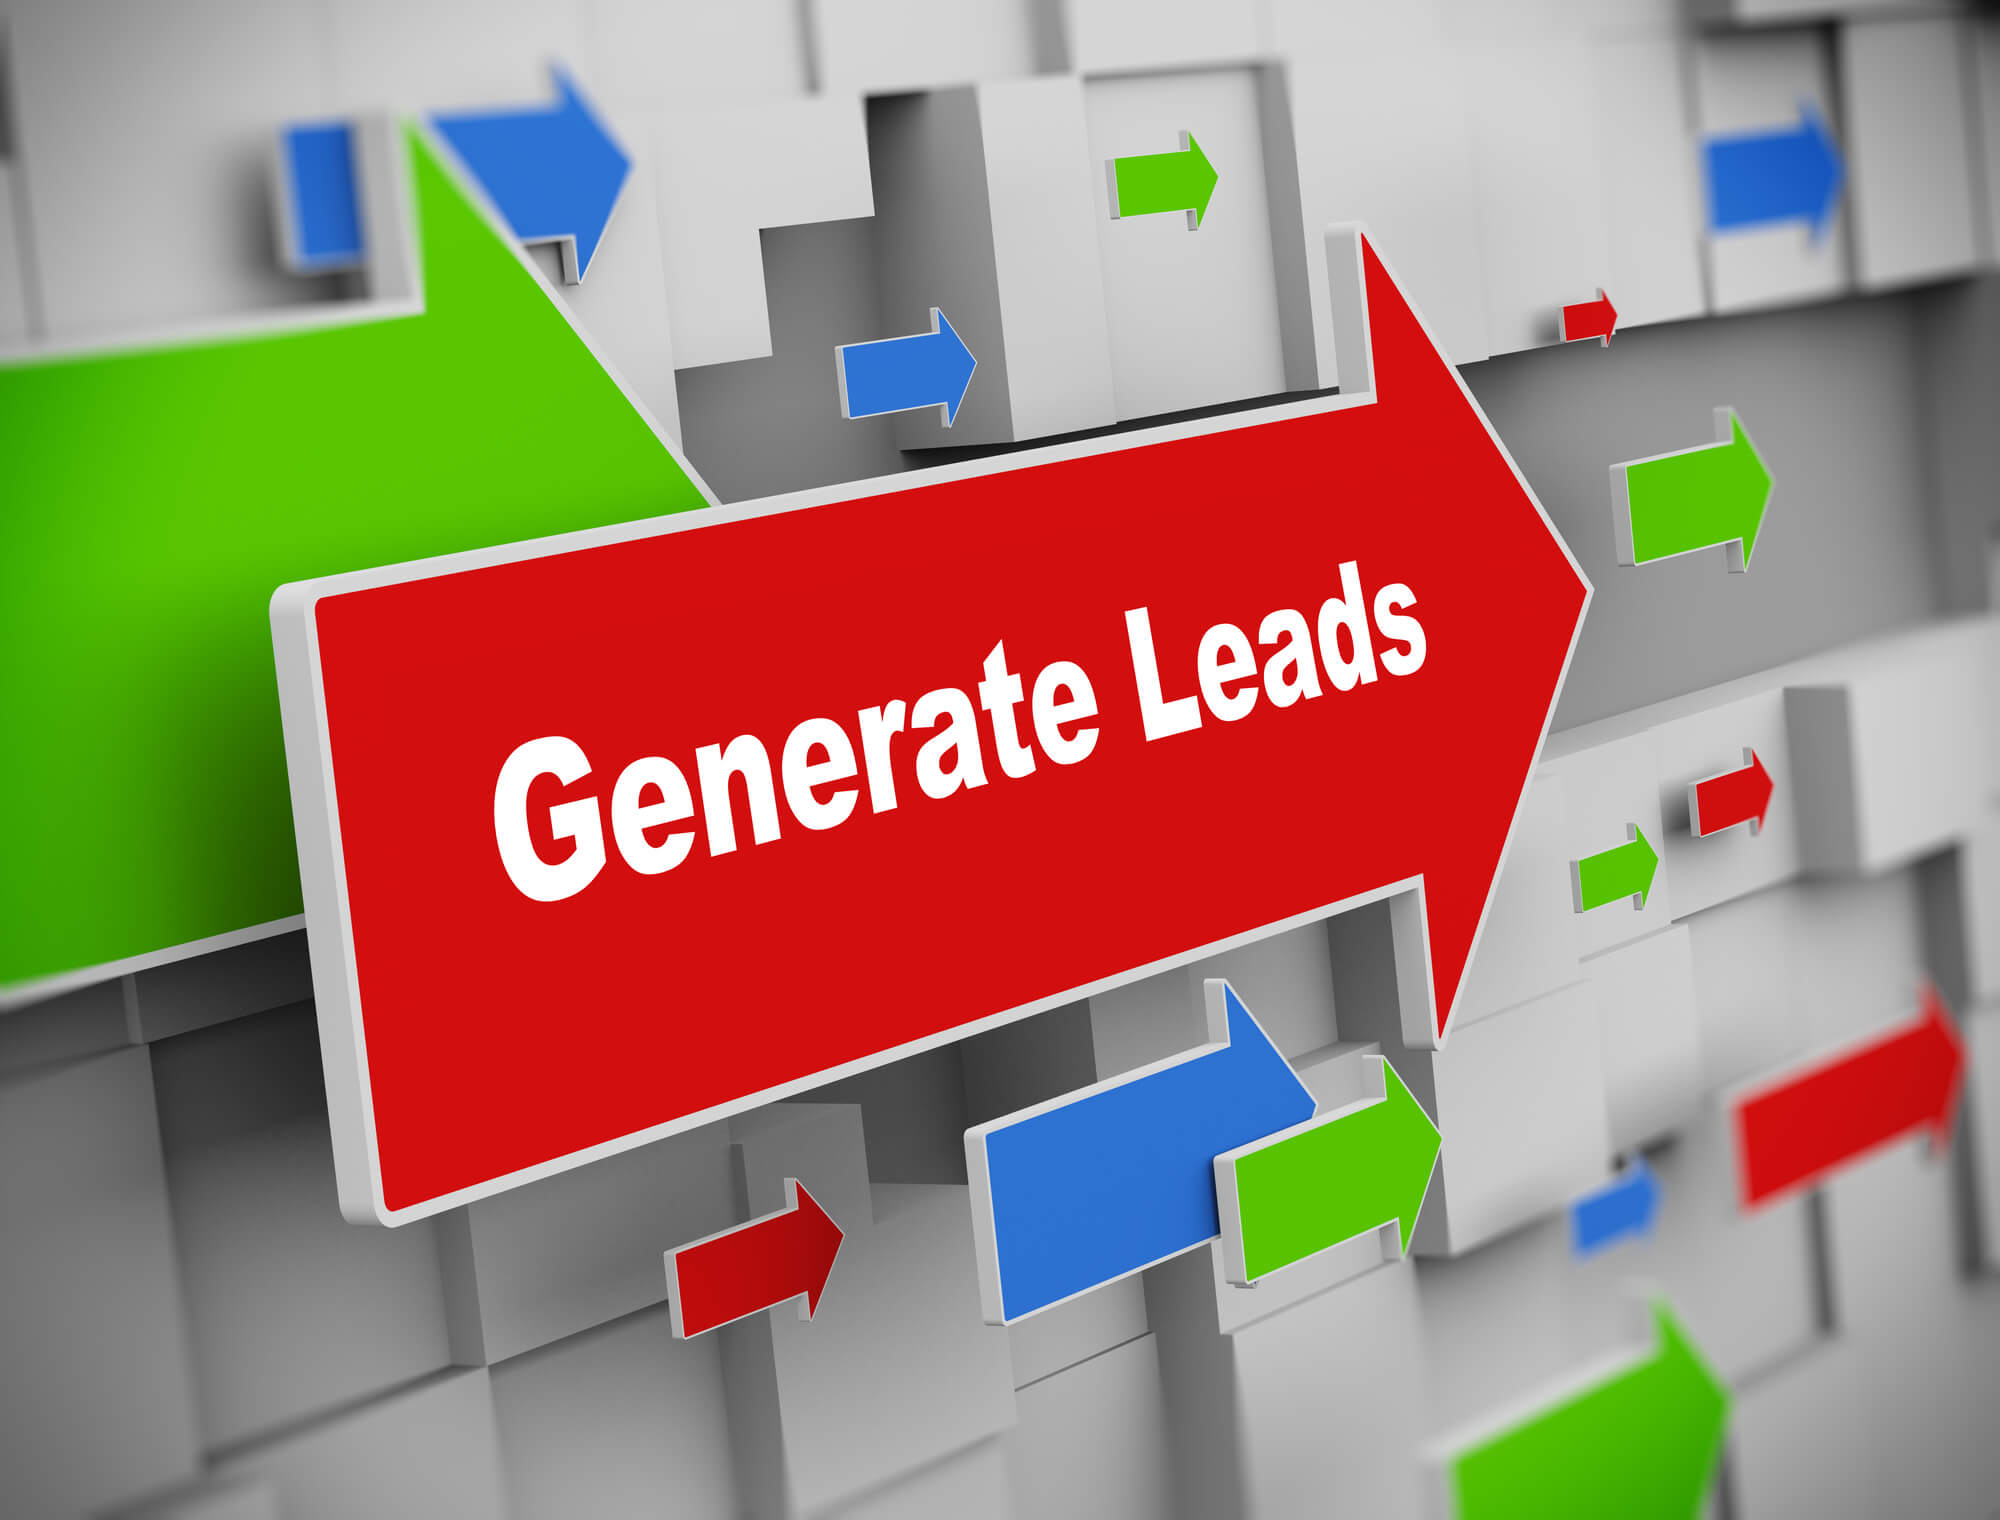 Moving Leads 101: Generate Leads and Sales With These Tips